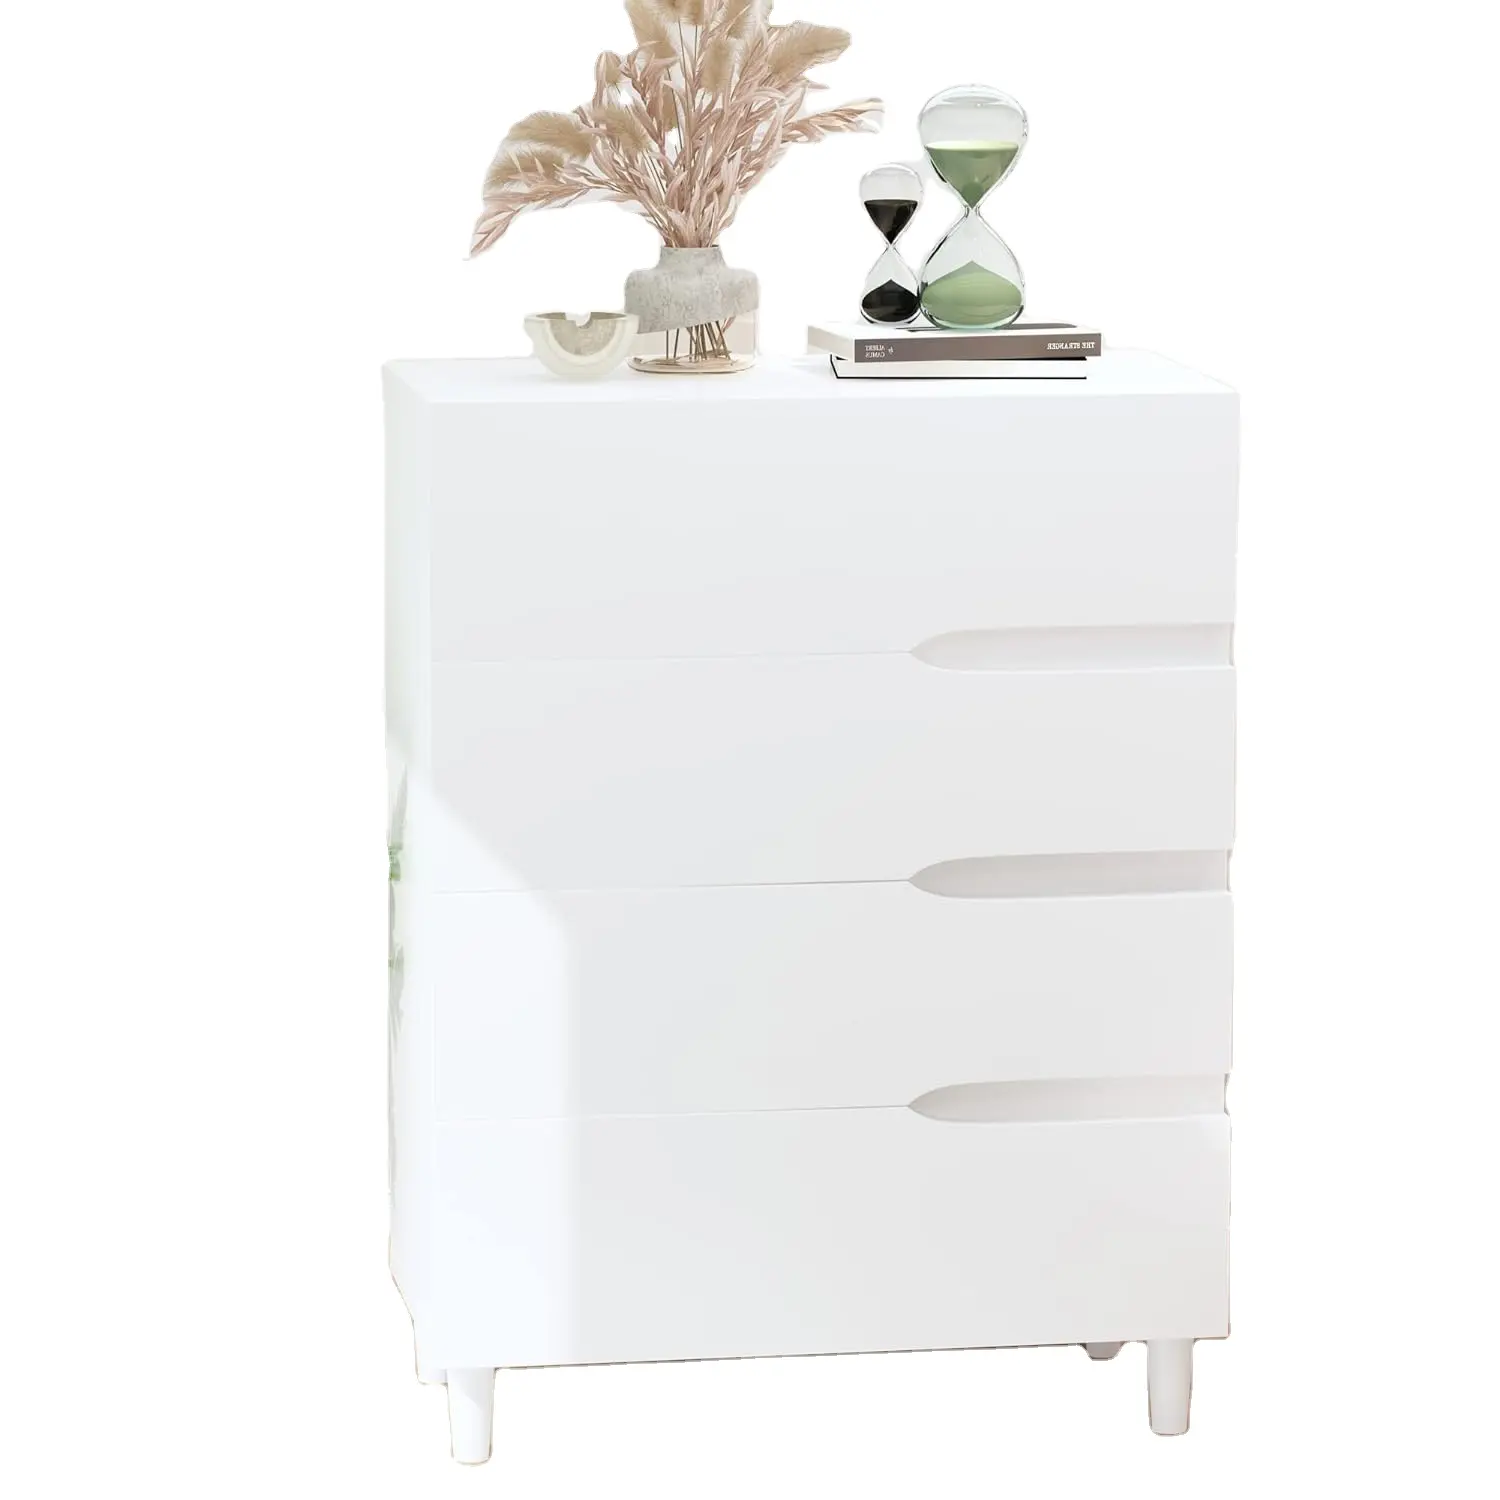 Wholesale Cheap Price 4 White Drawers Bedroom Dresser with Cut-Out Handles Wooden Chest with Rich Storage for Bedroom